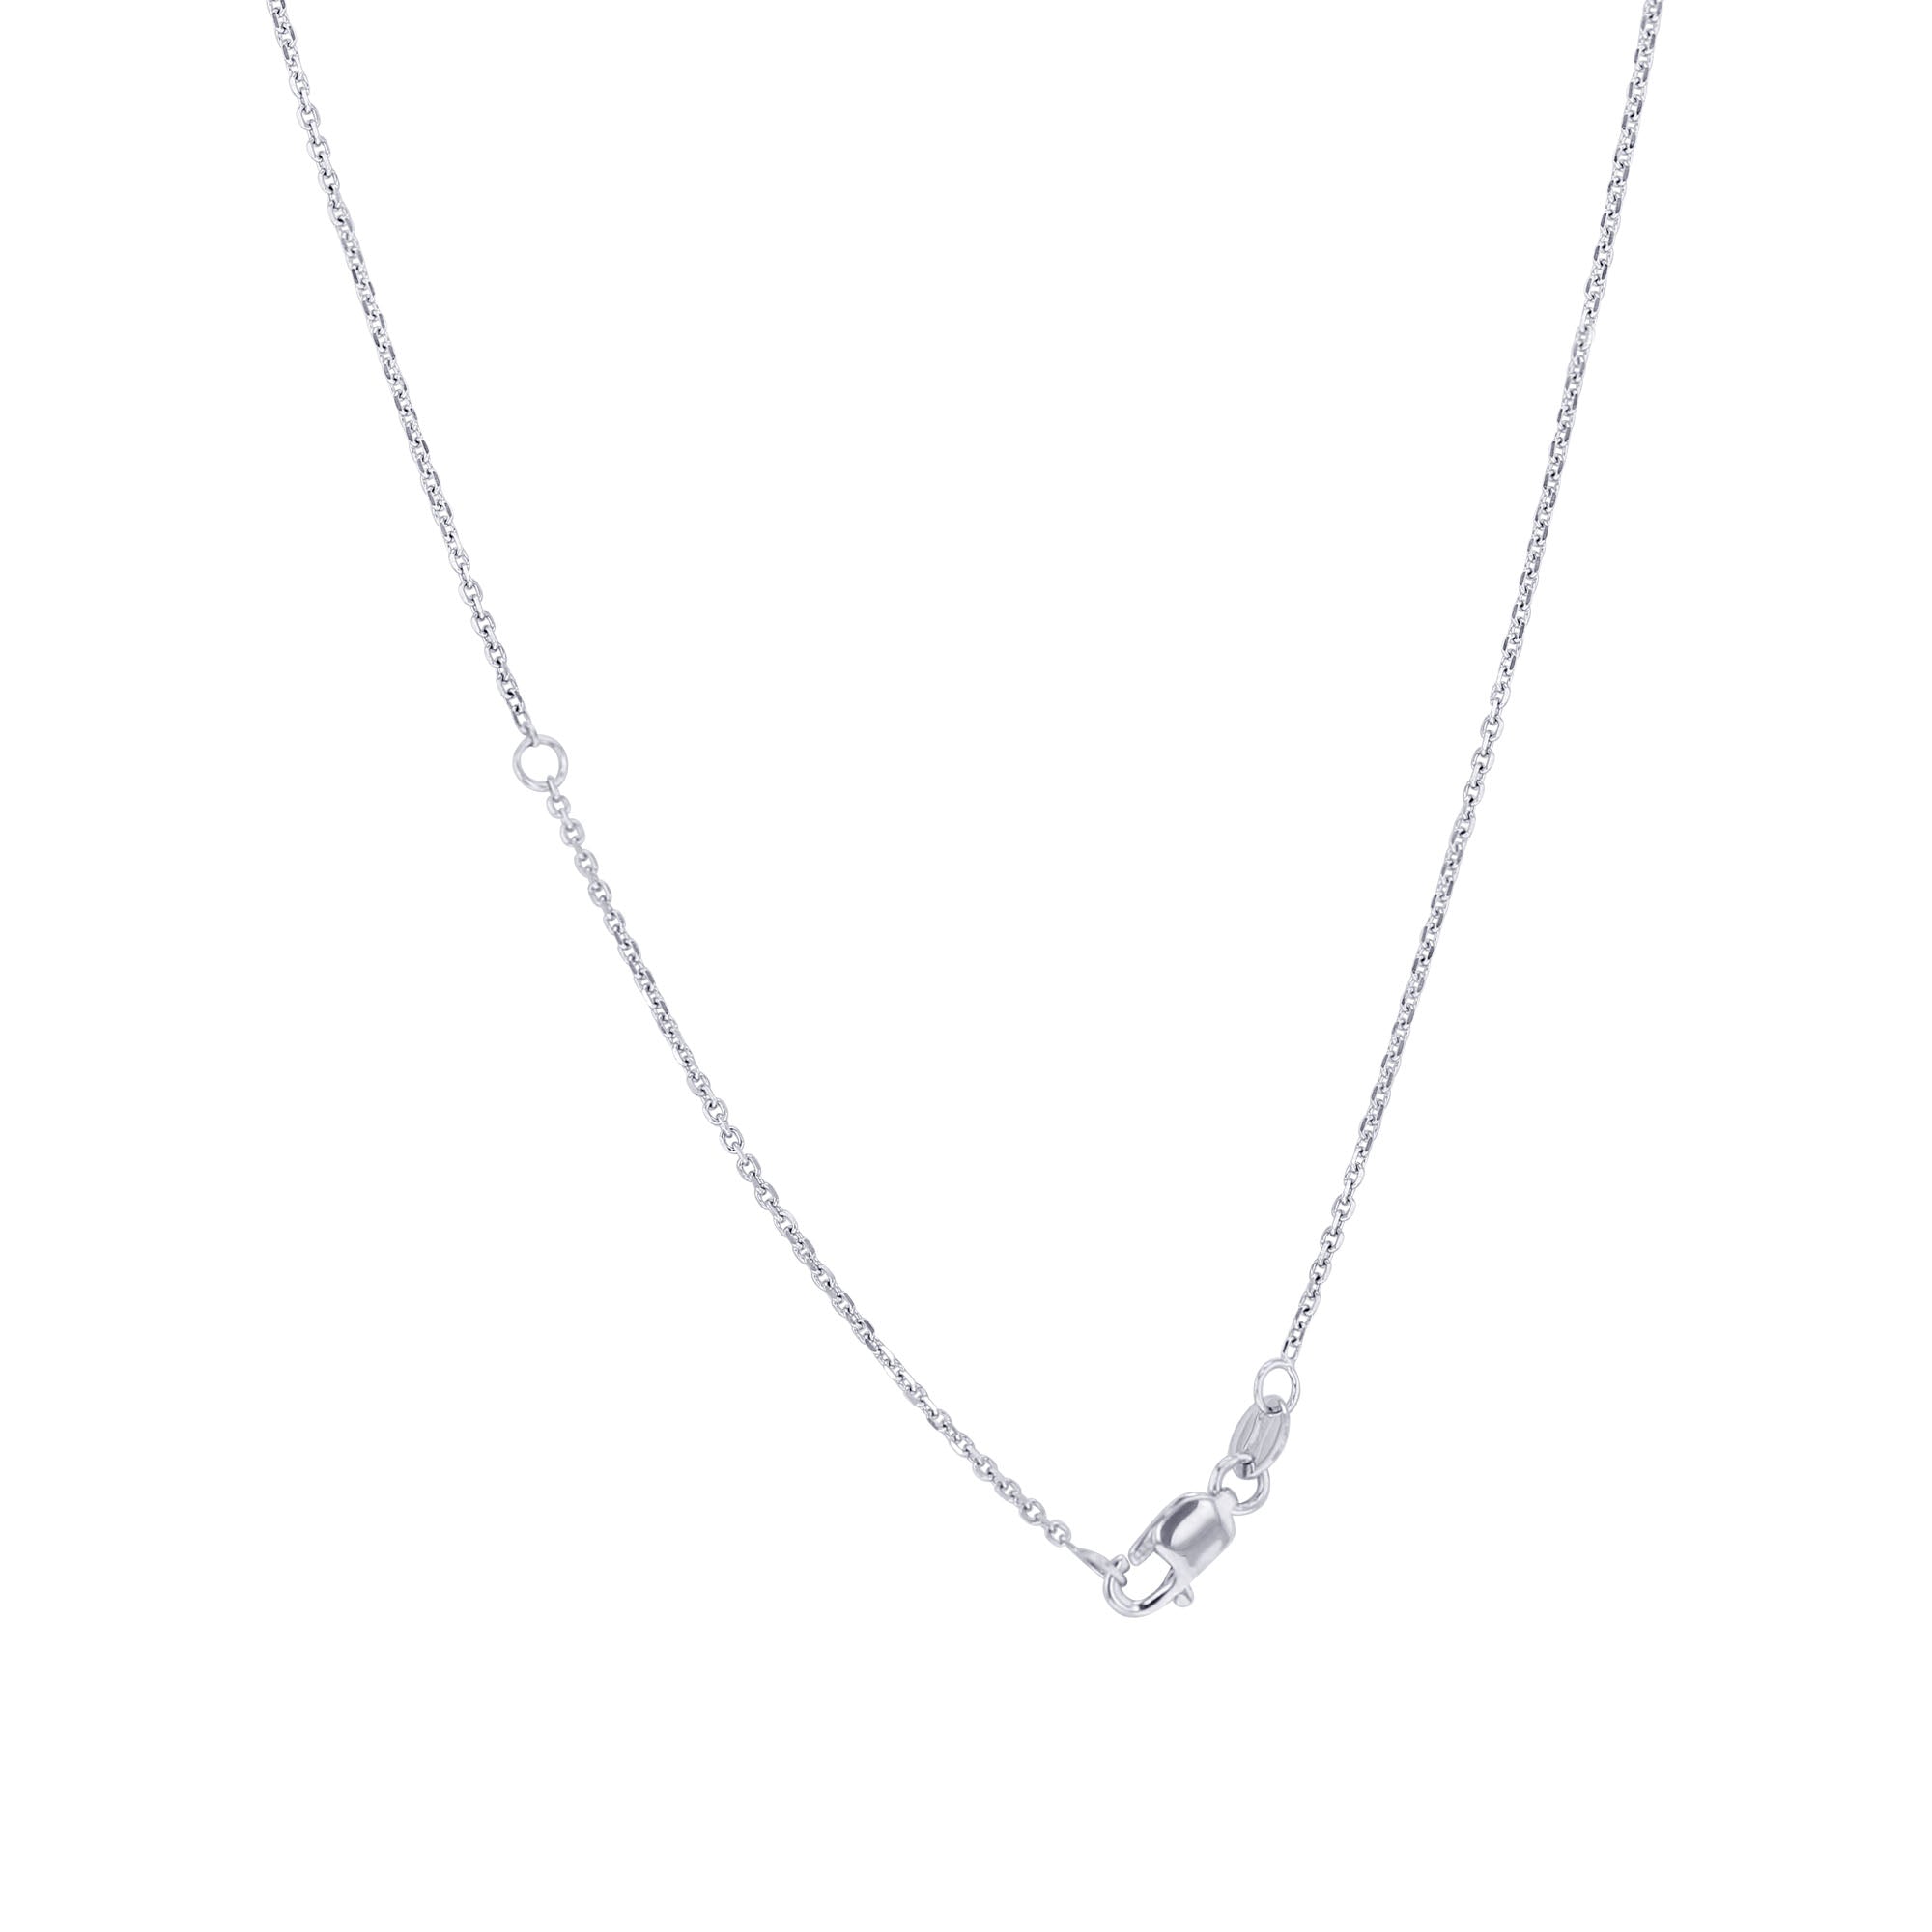 Enid Black and White Halo Diamond Necklace 1 1/4ct